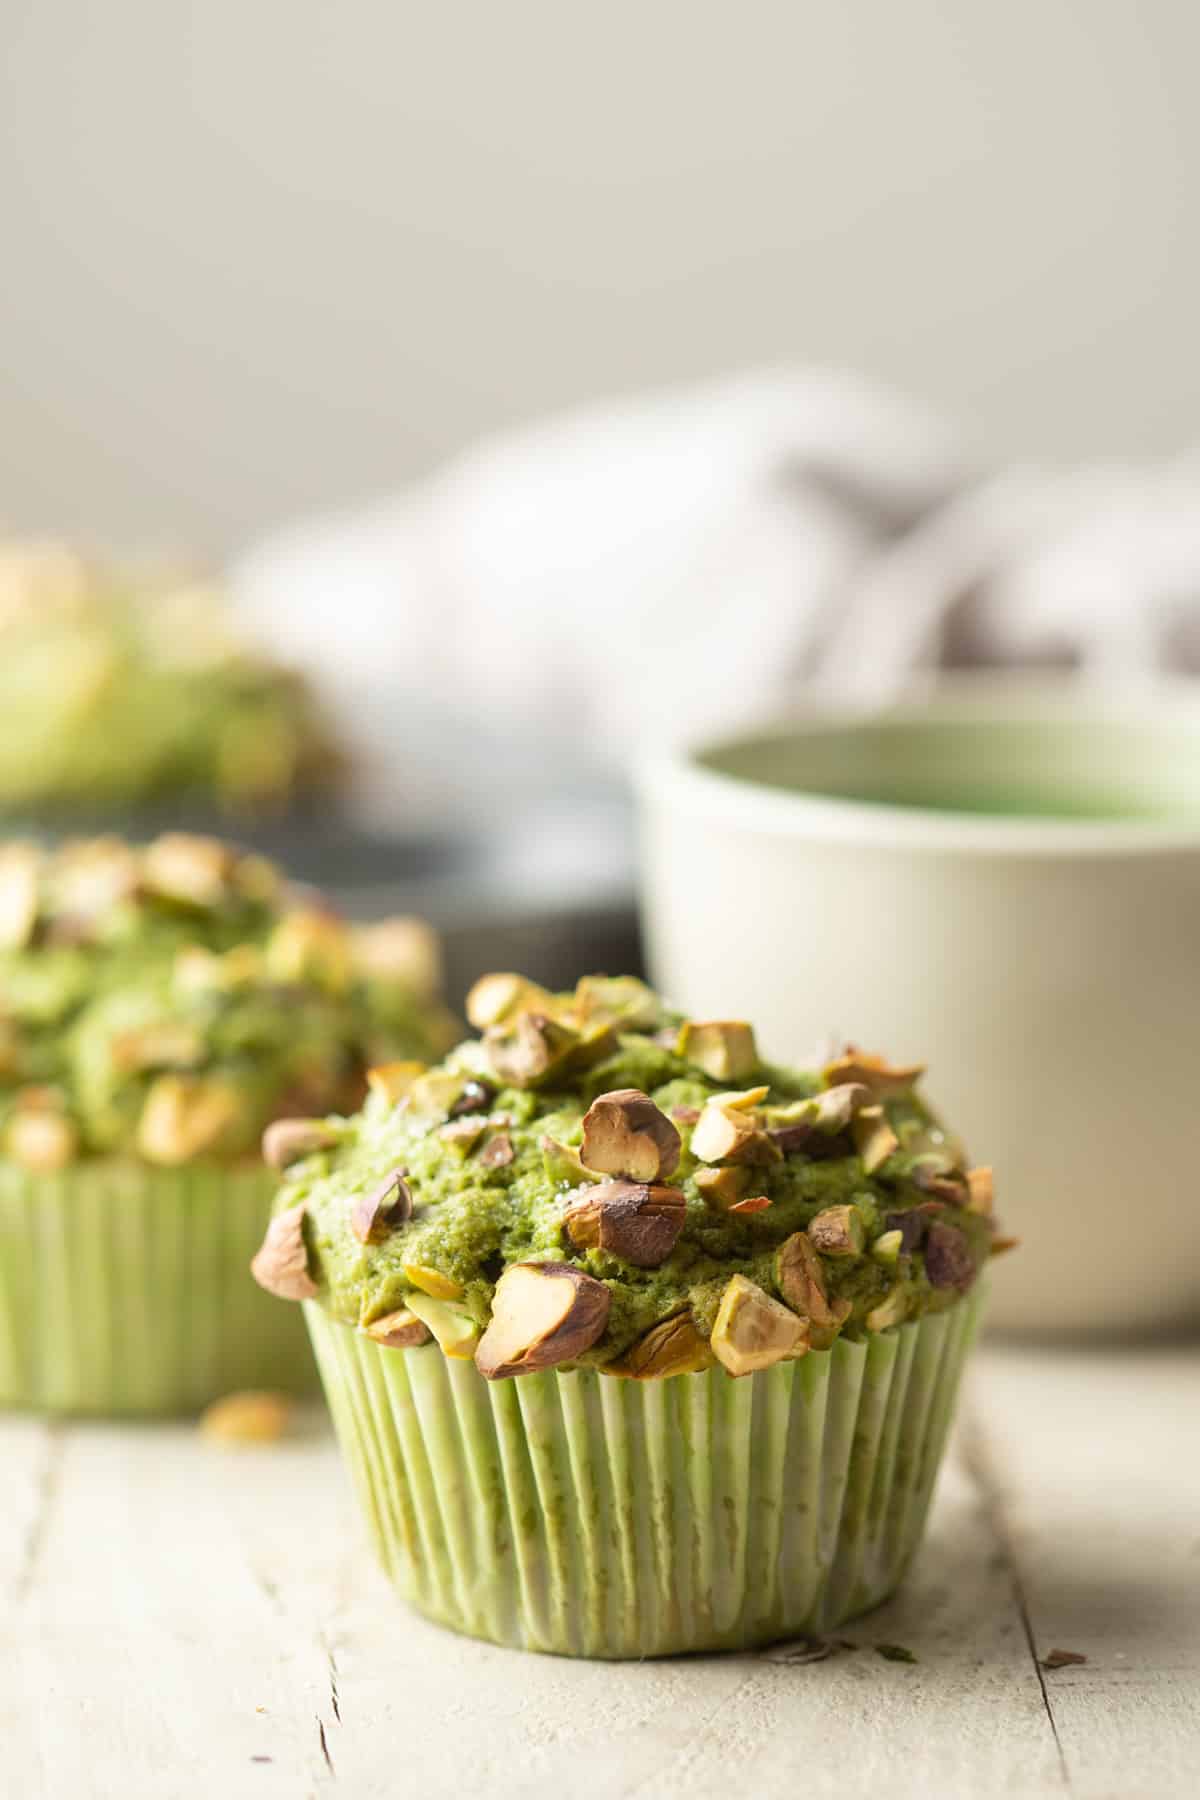 Matcha Pistachio Muffins and tea cup on a white wooden surface.